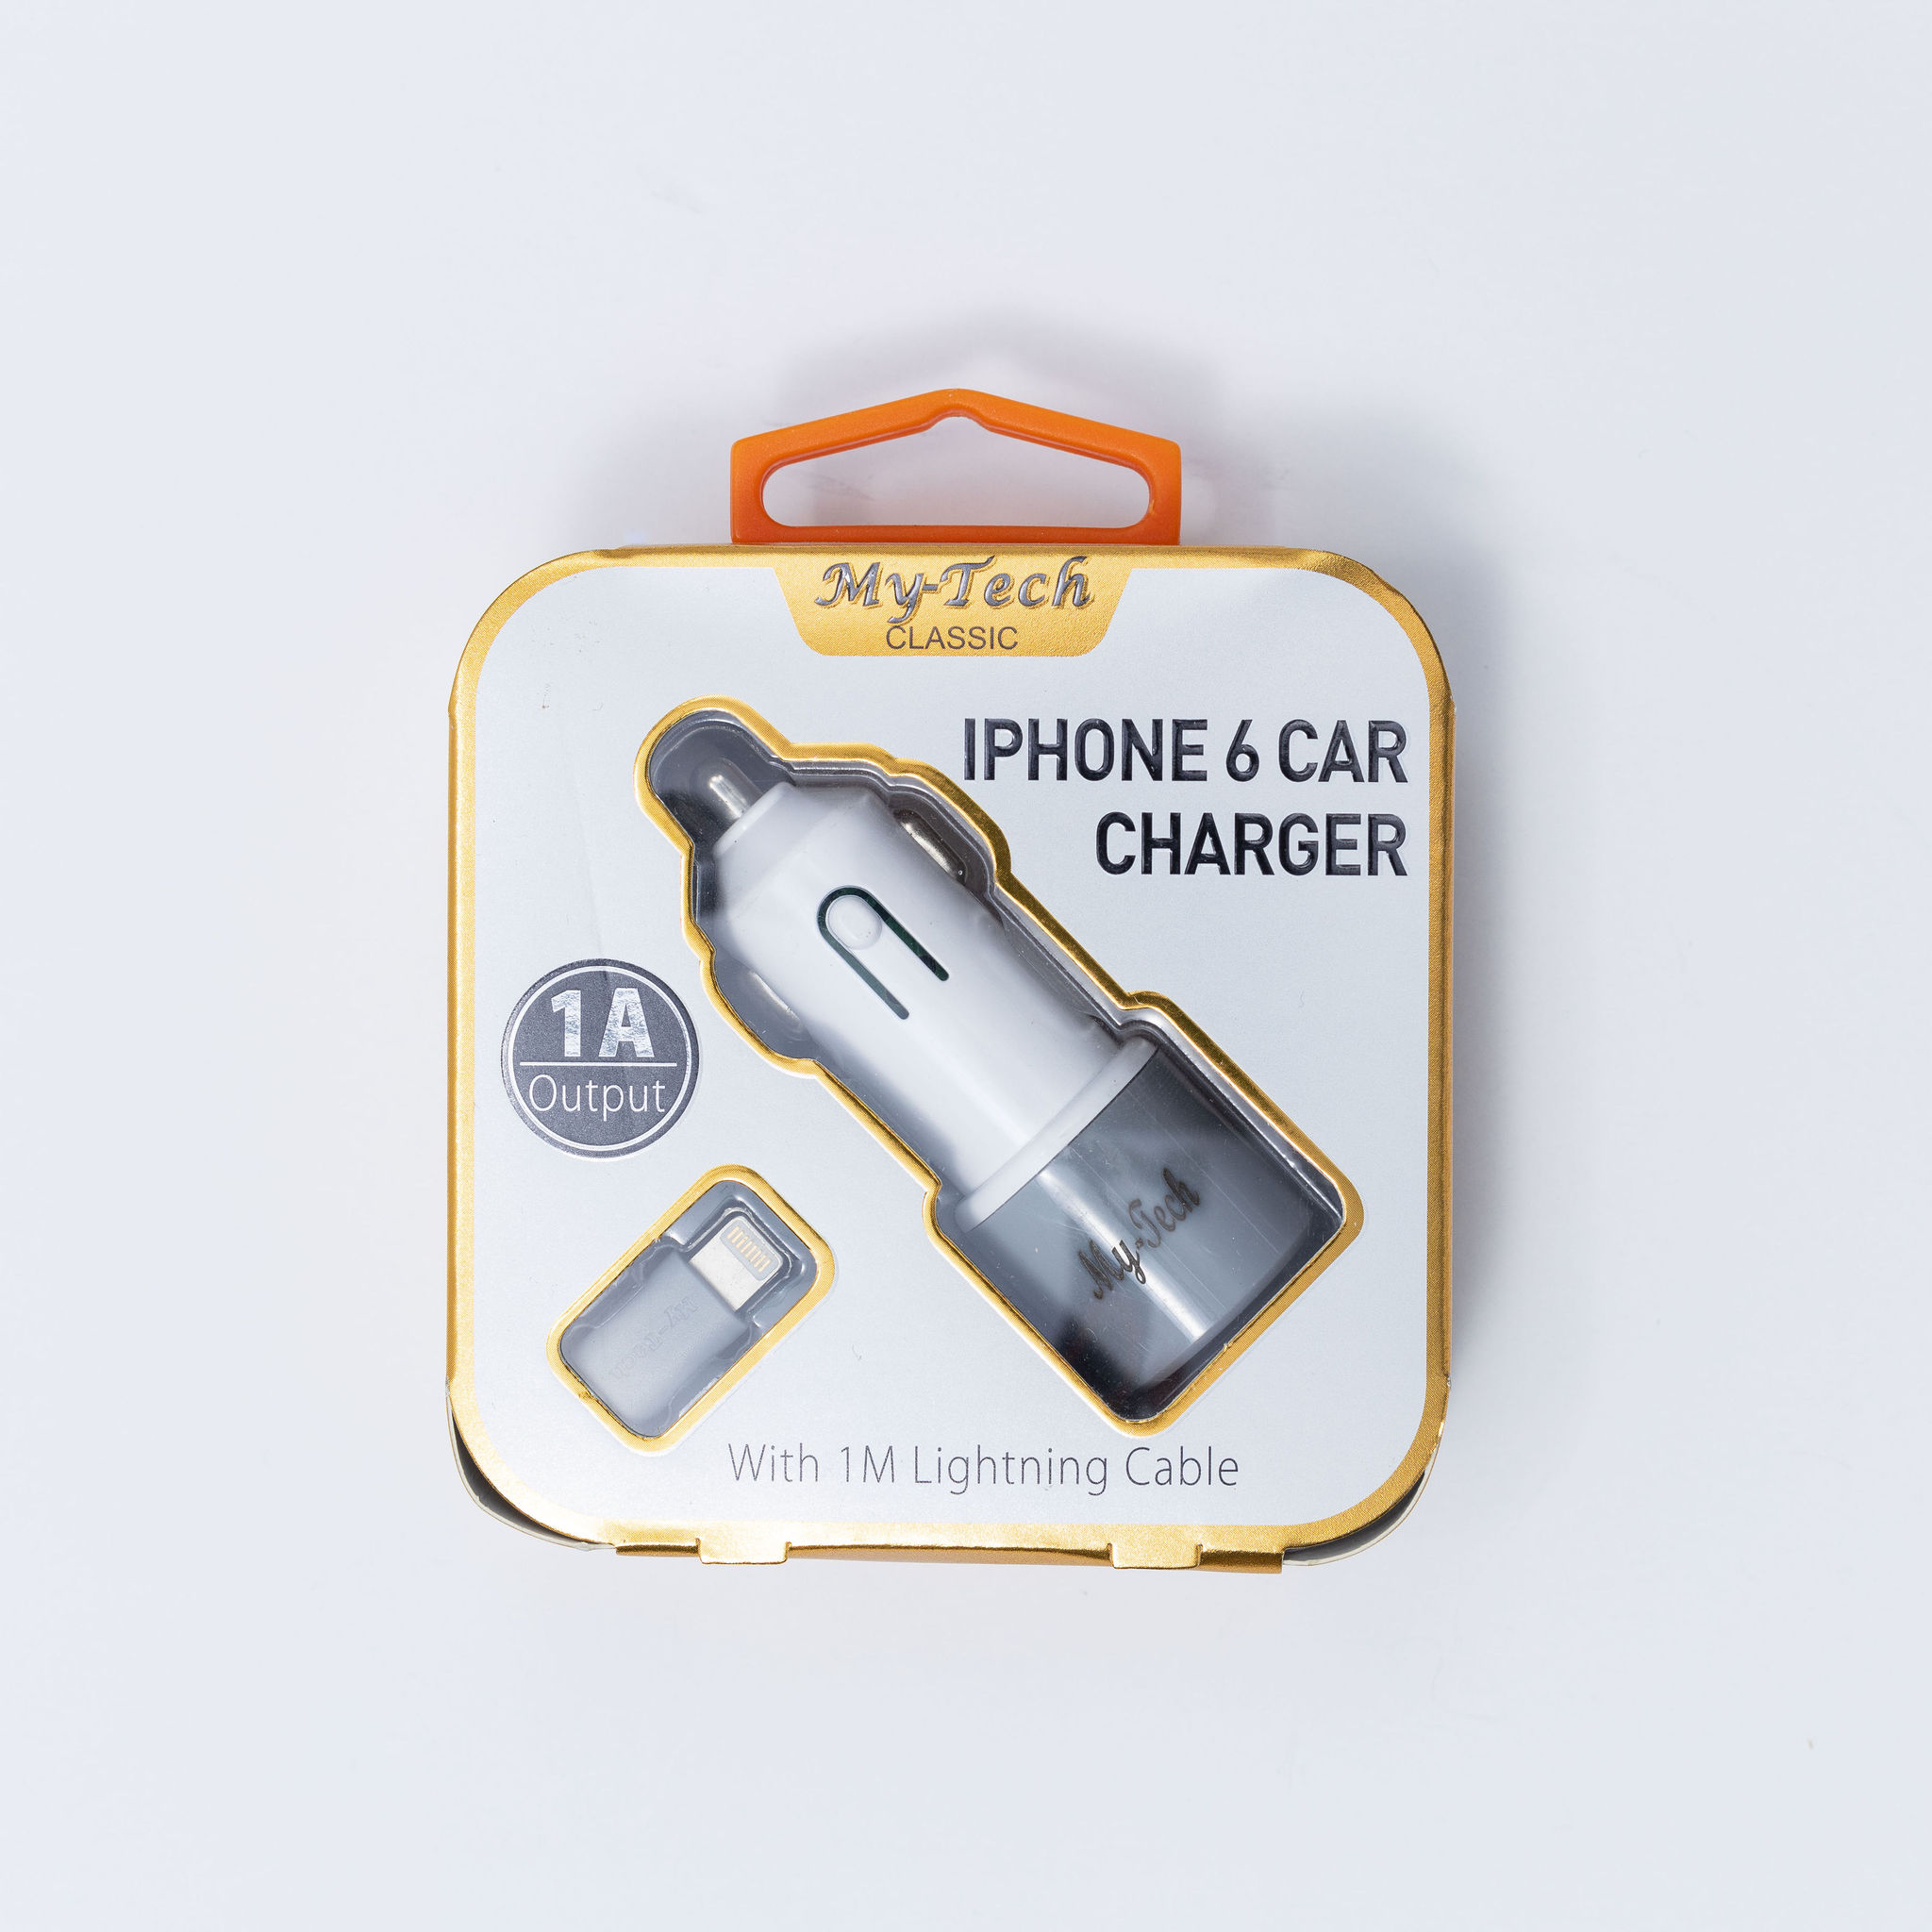 Warner Car and cable combo for Iphone